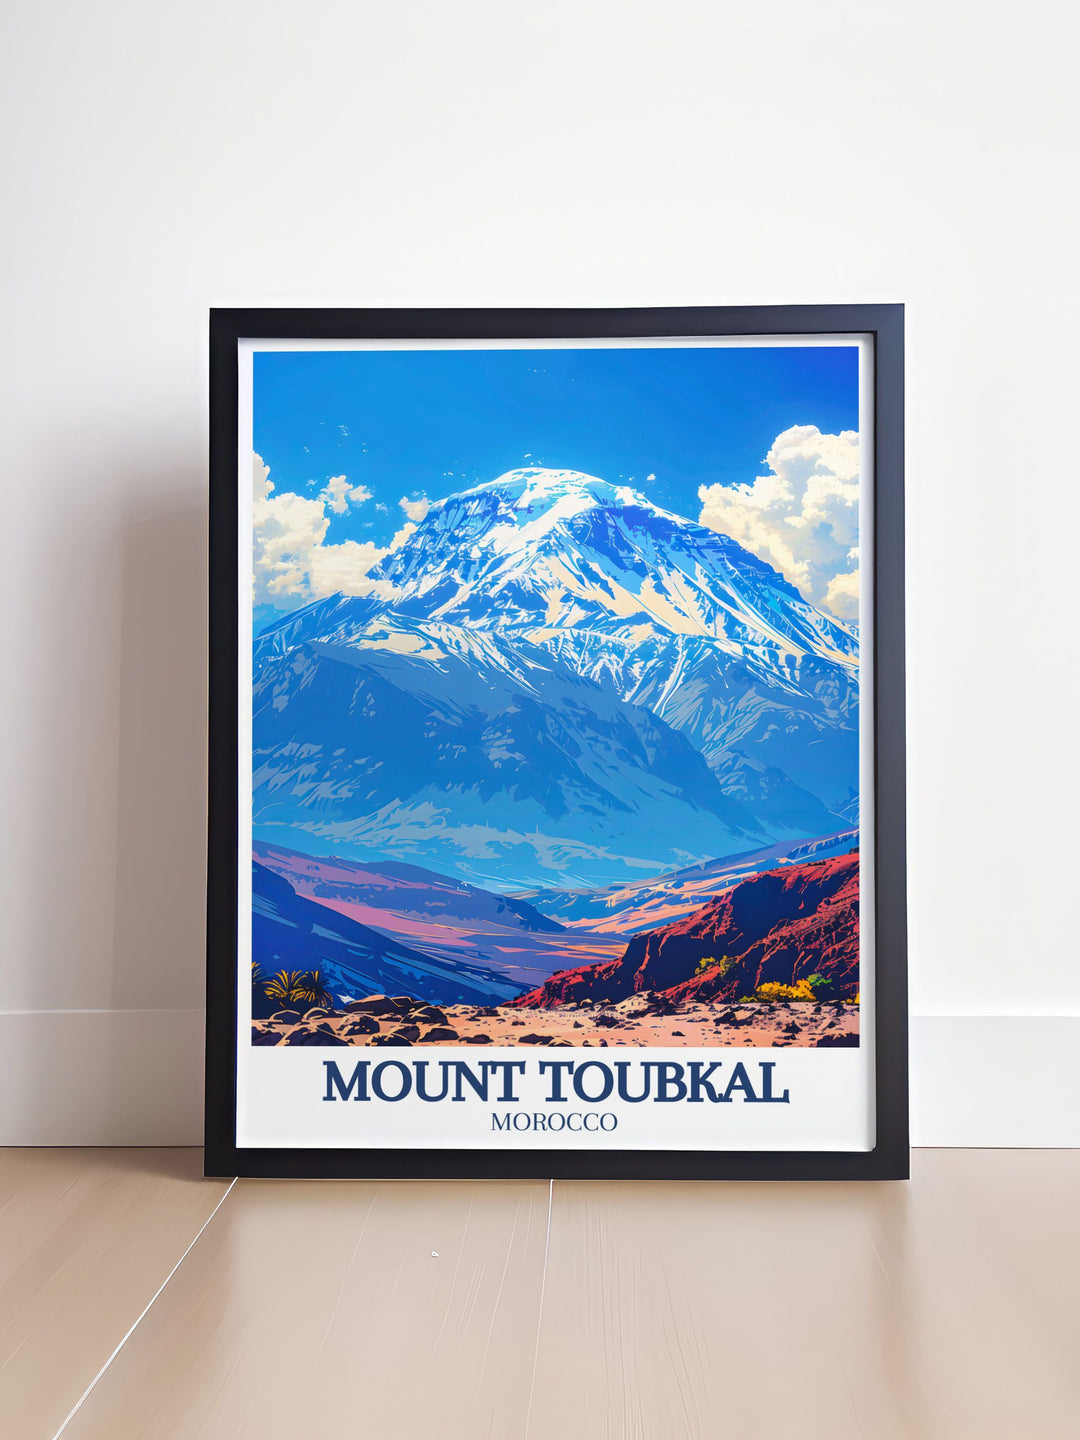 High Atlas mountains home décor print highlighting the serene beauty and rugged terrain of Moroccos iconic region from Mount Toubkal to lush valleys perfect for trekking enthusiasts and anyone who loves the adventure and natural wonders of North Africa.